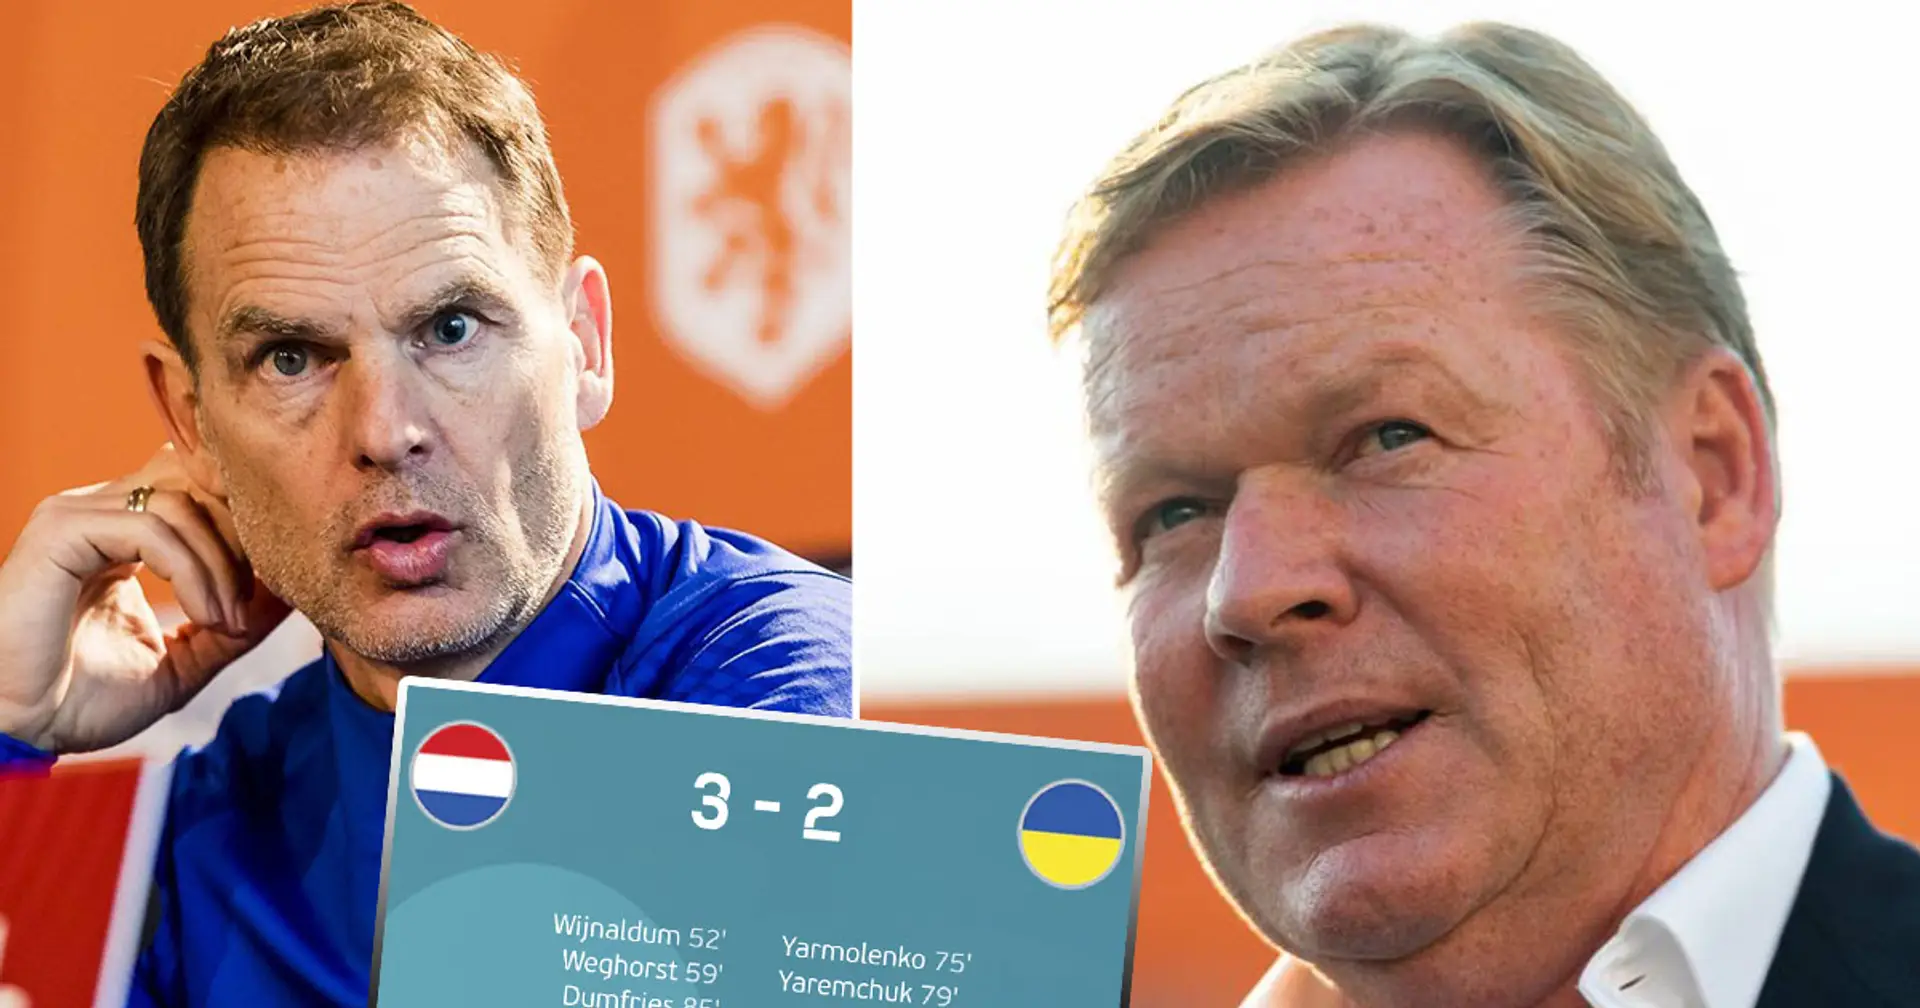 'People are very positive. That surprises me': Koeman on the Netherlands' Euro 2020 start